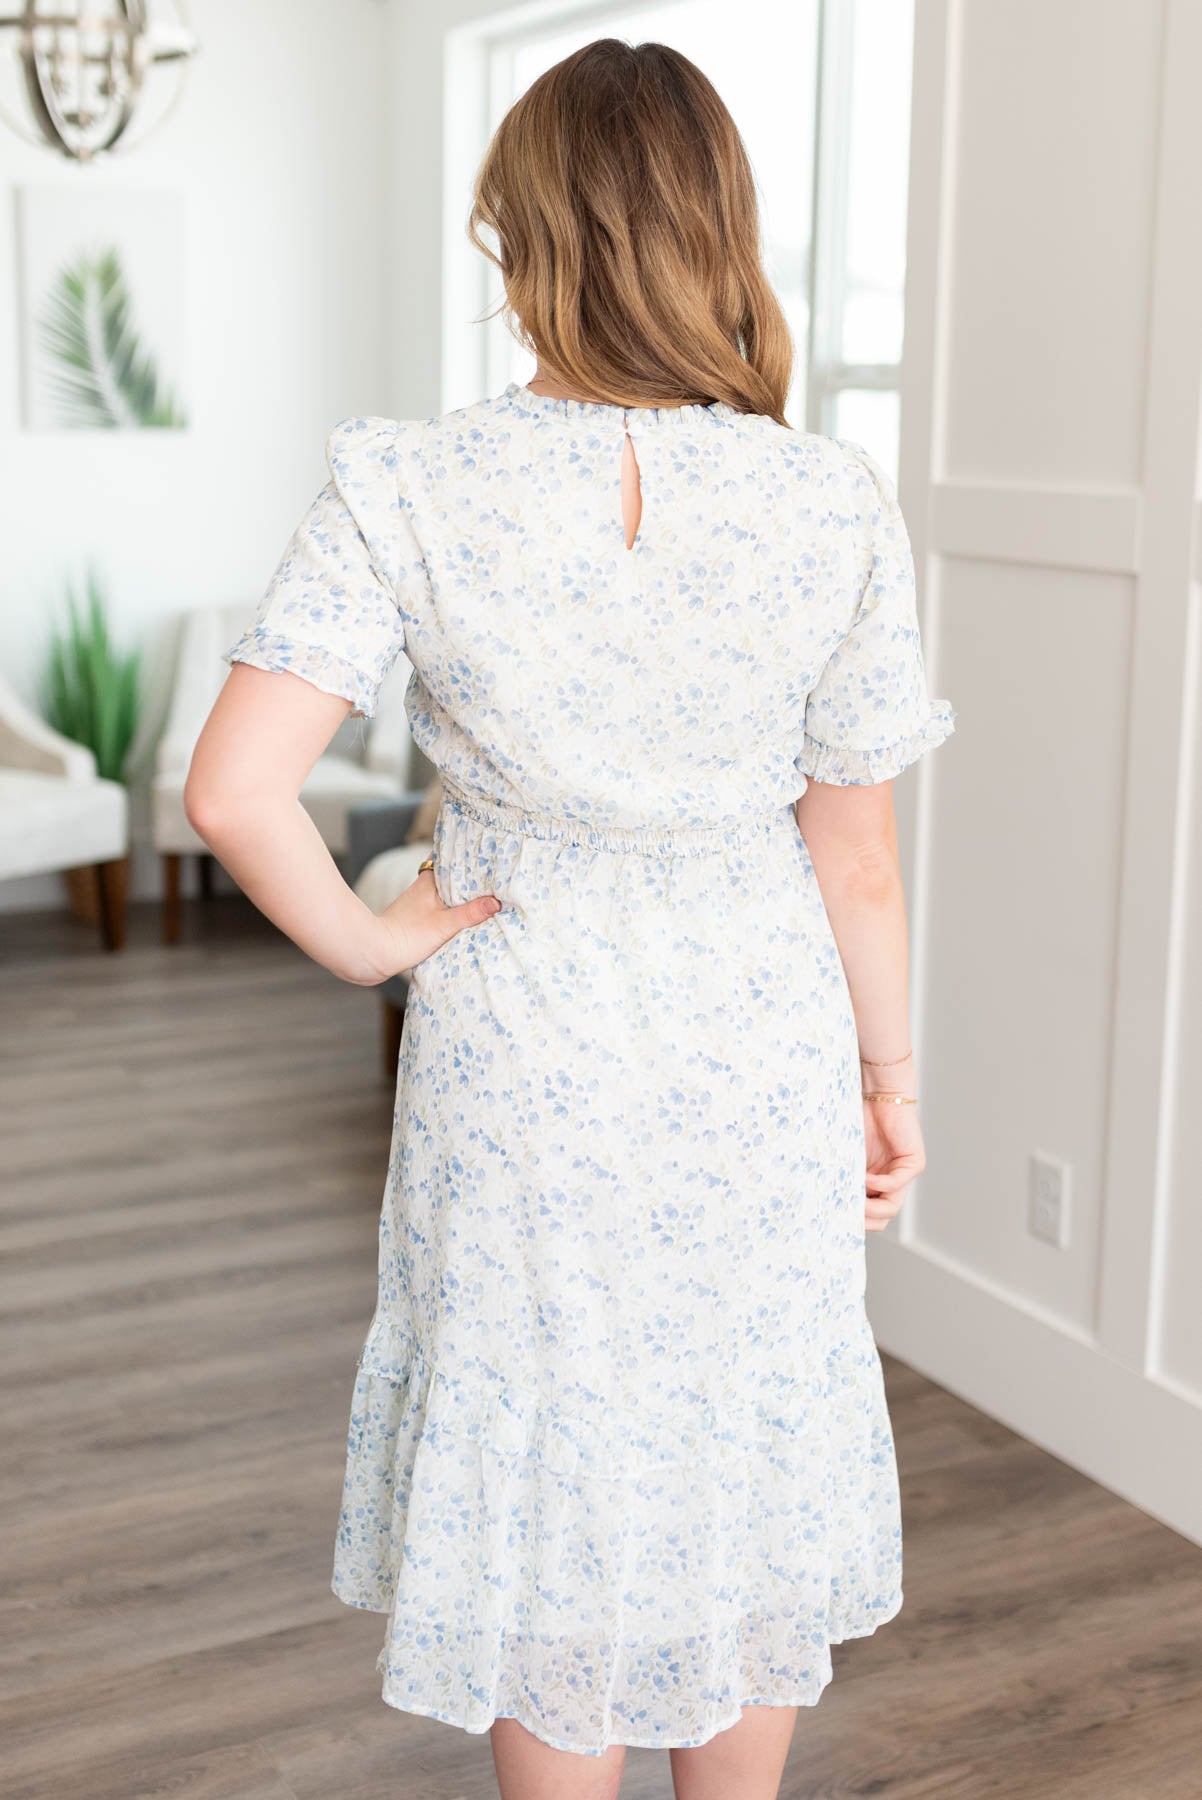 Back view of the blue ivory floral dress